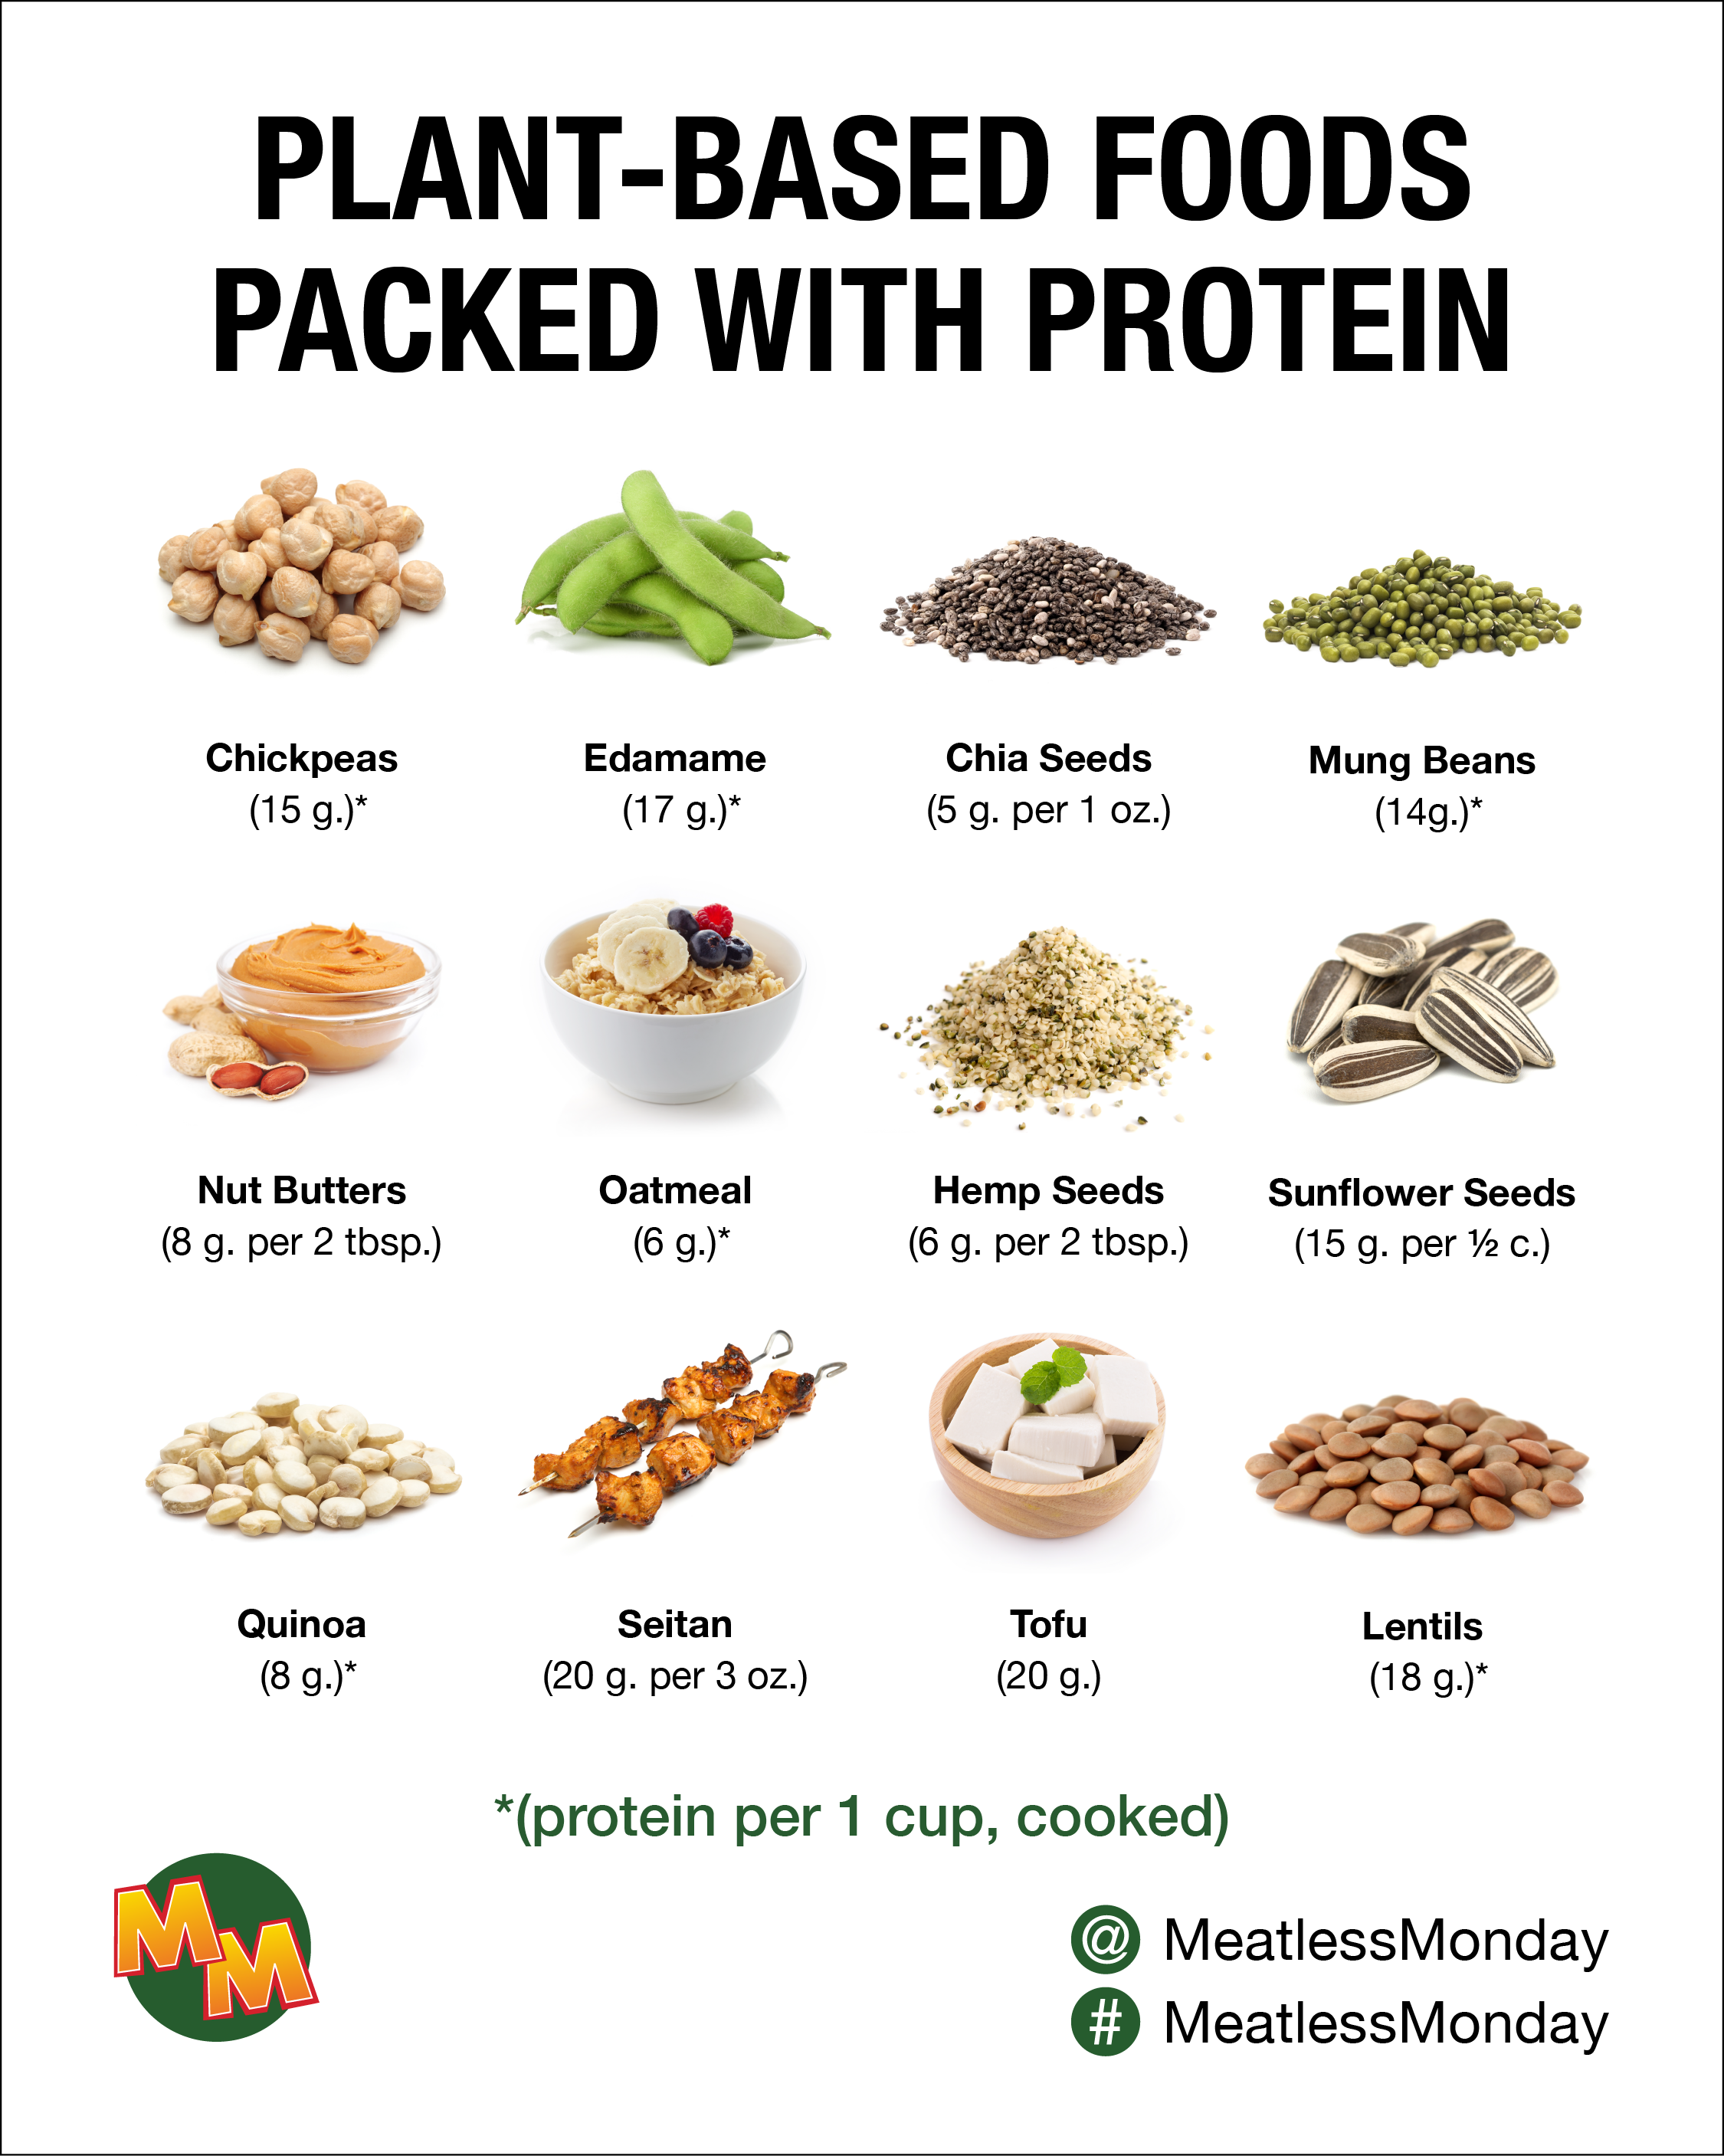 Plant-Based Protein - The Monday Campaigns